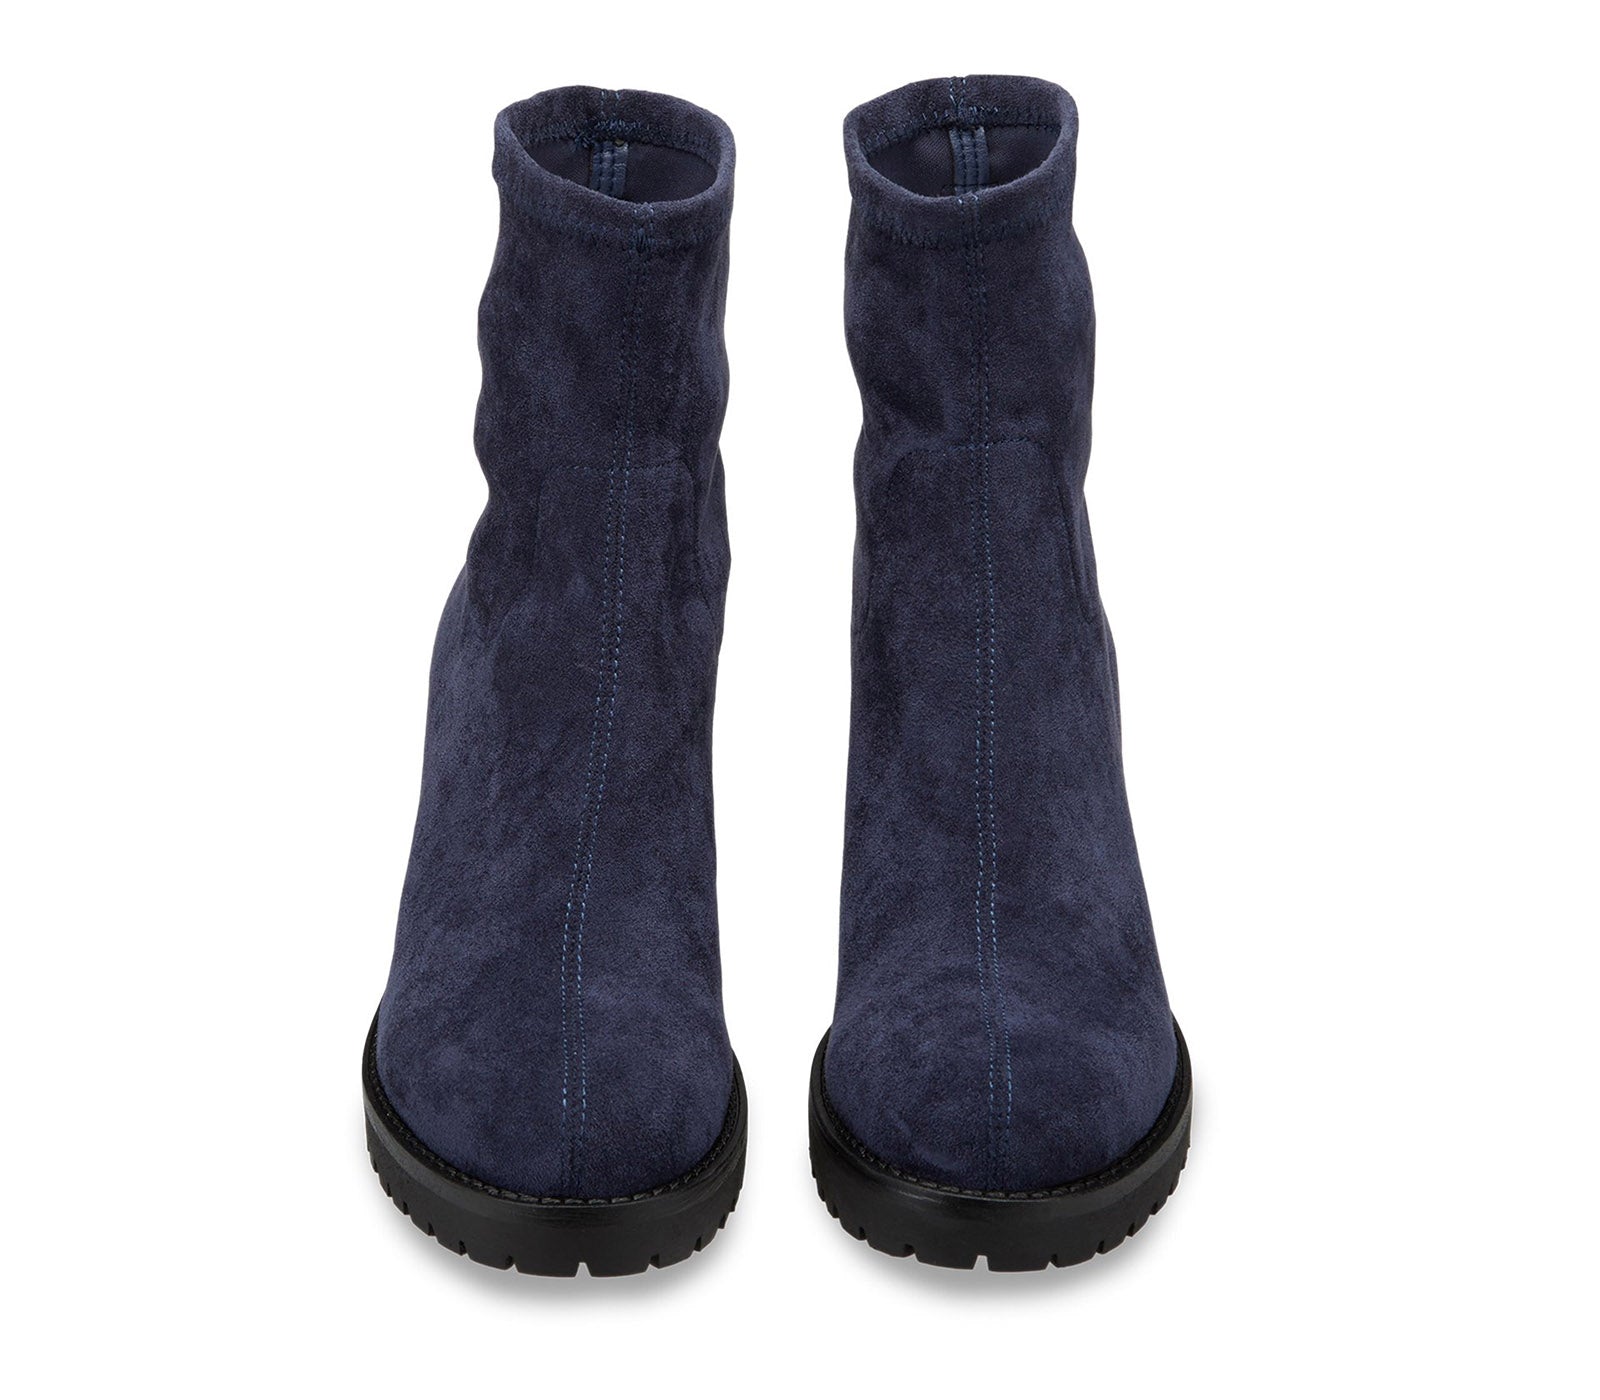 Blue suede ankle boots for women